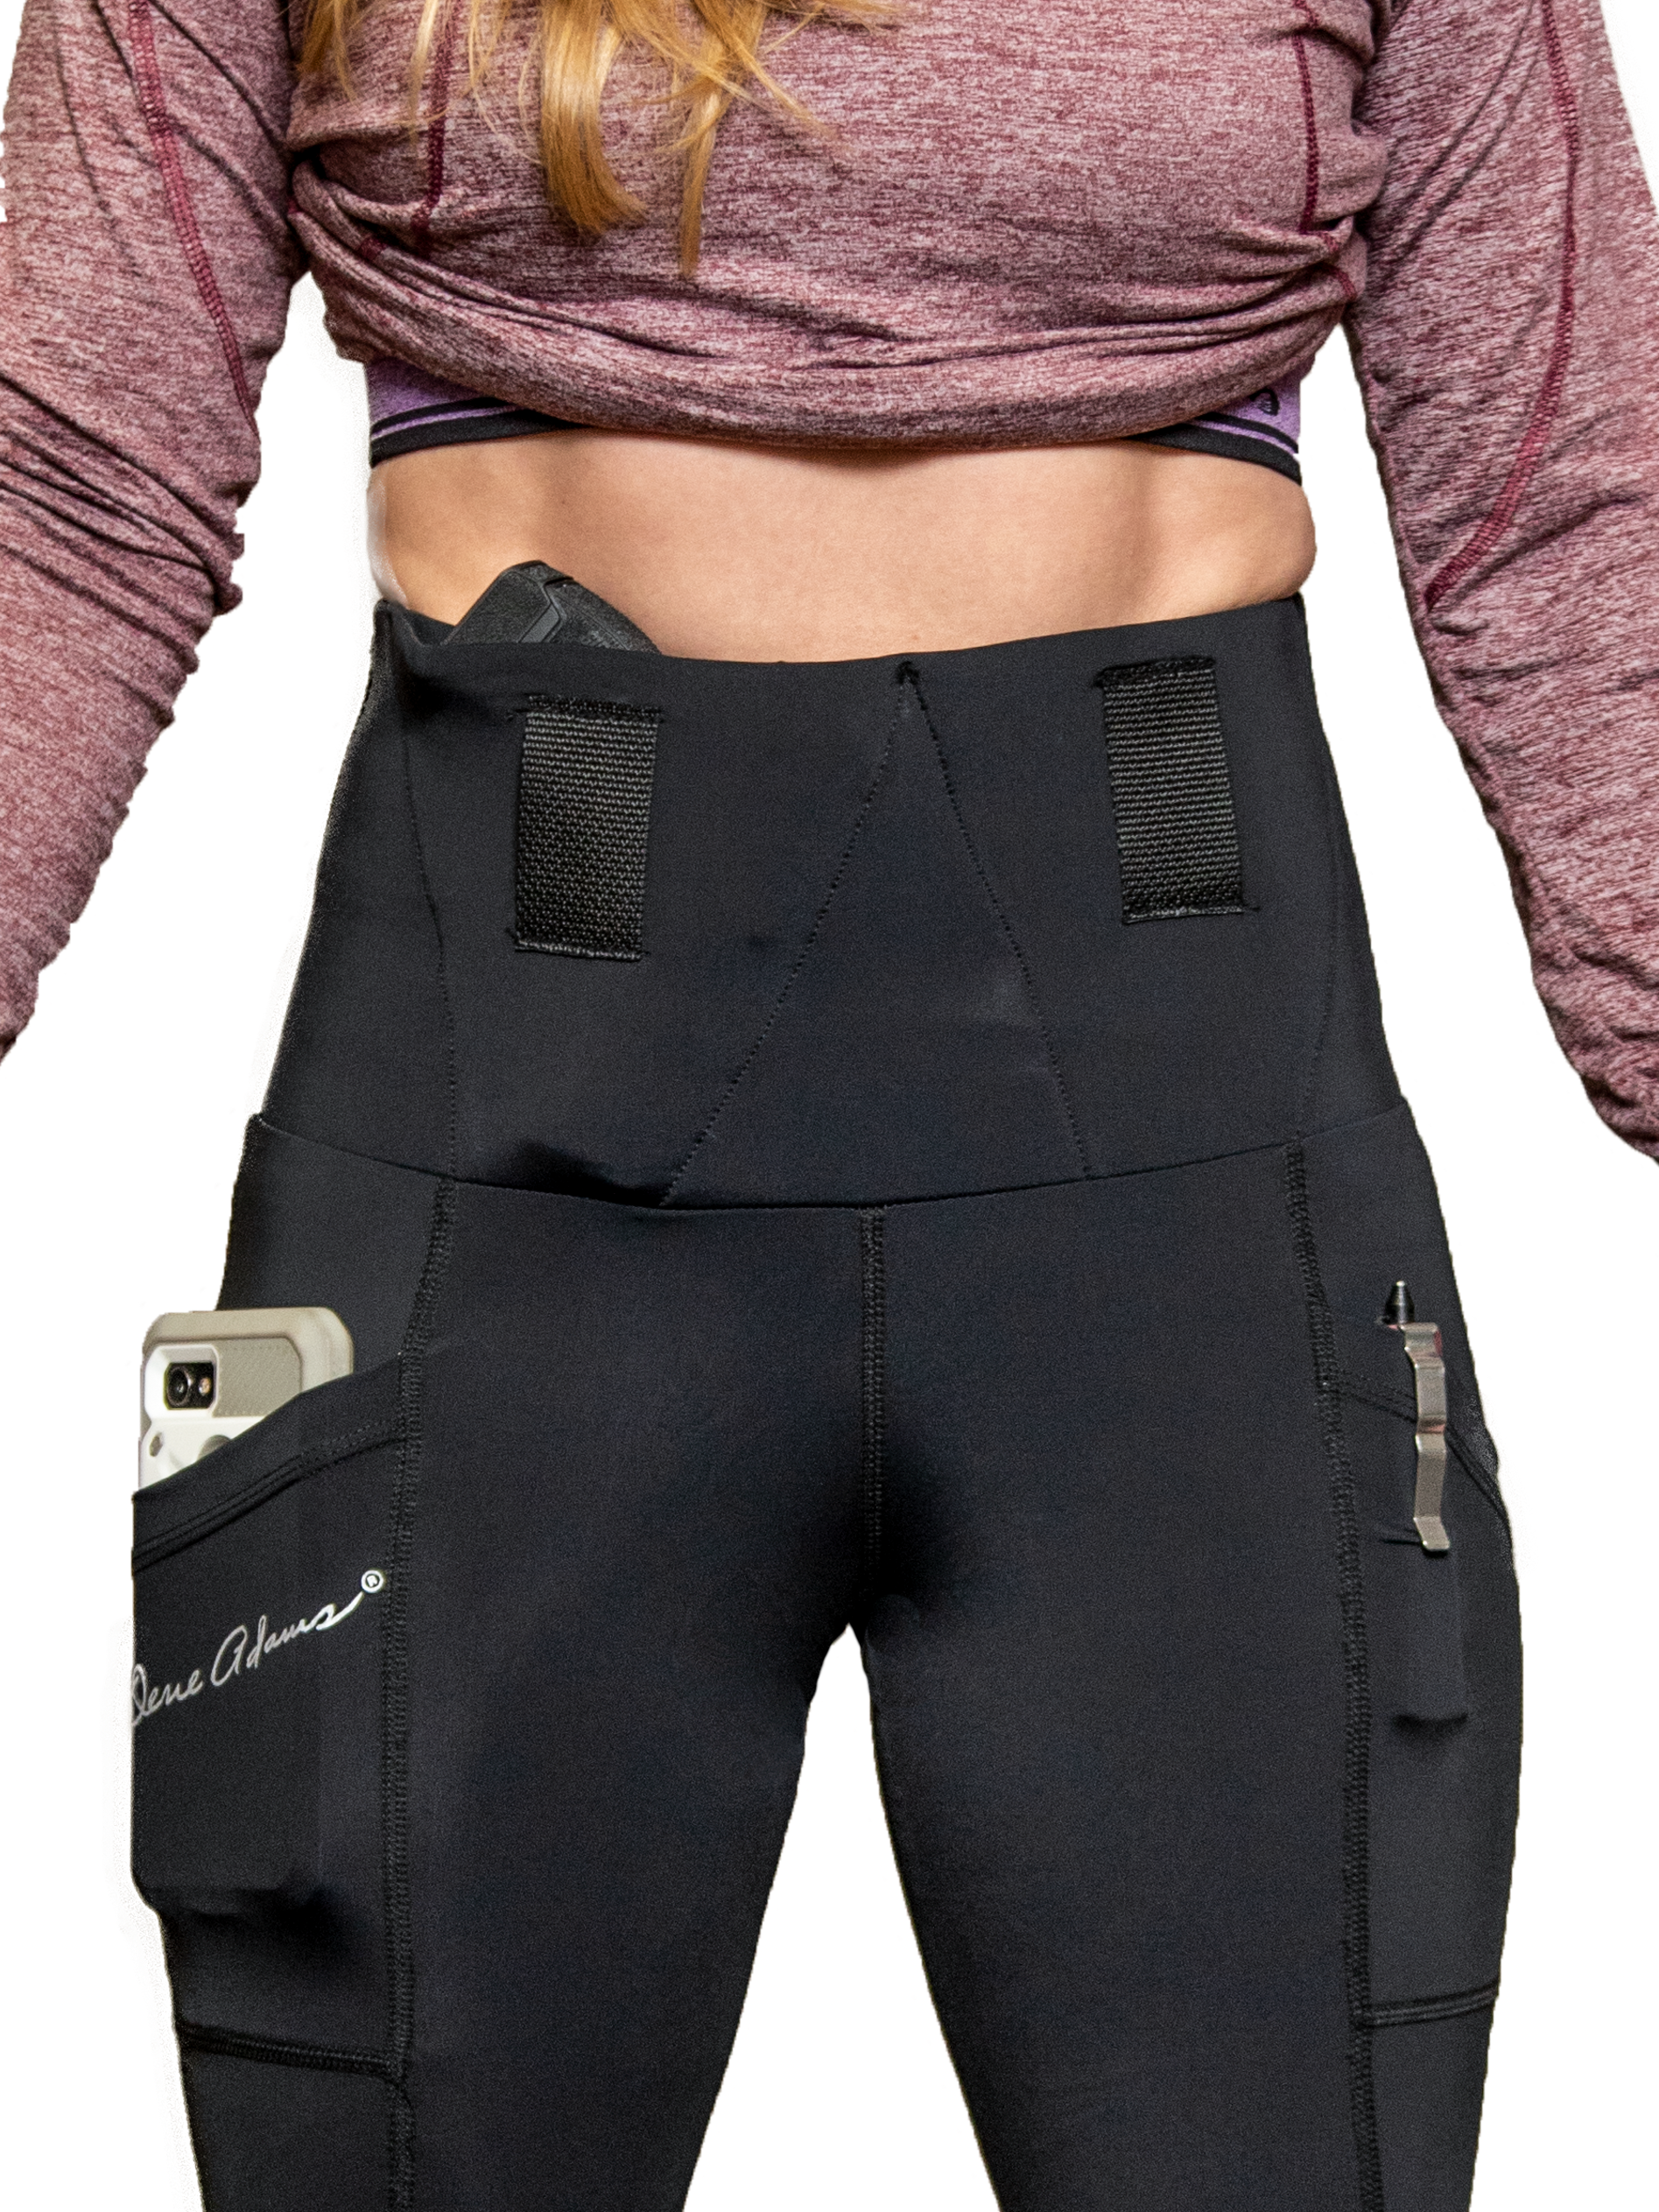 Concealed Carry Leggings  Customer  International Society of  Precision Agriculture